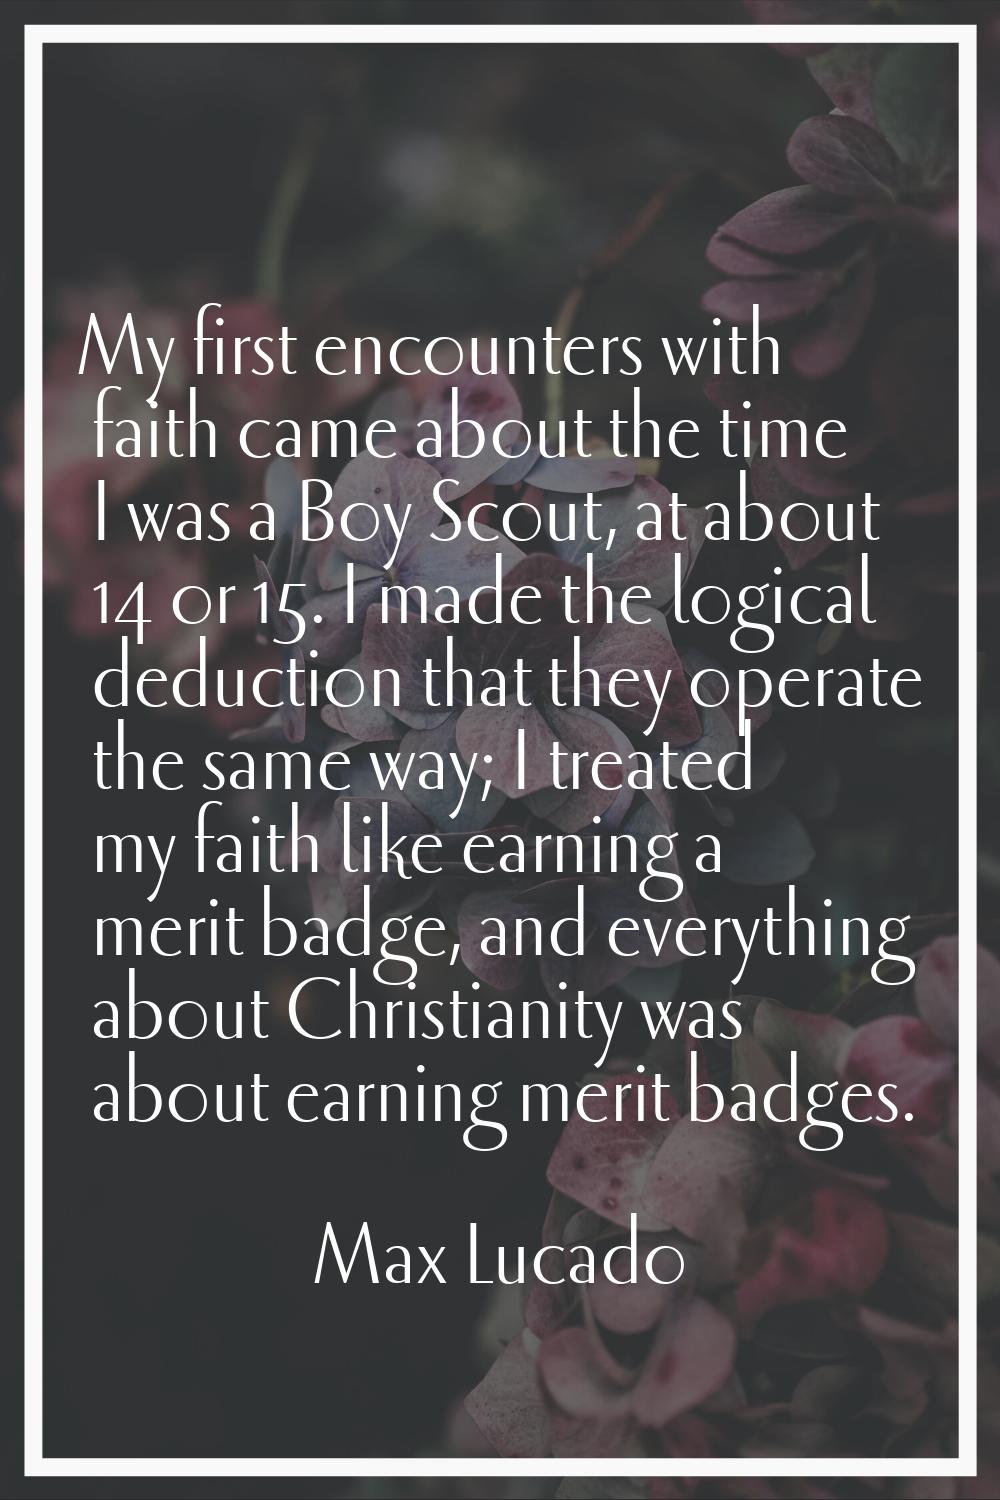 My first encounters with faith came about the time I was a Boy Scout, at about 14 or 15. I made the